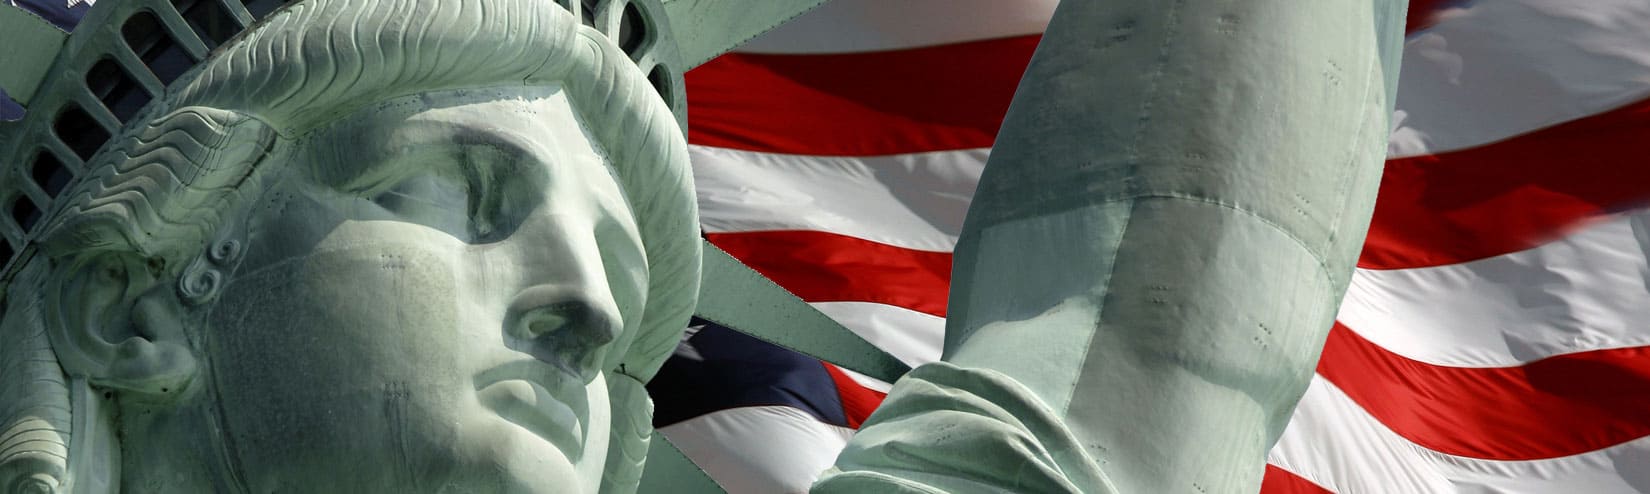 US-Immigration-test-questions-liberty (1)